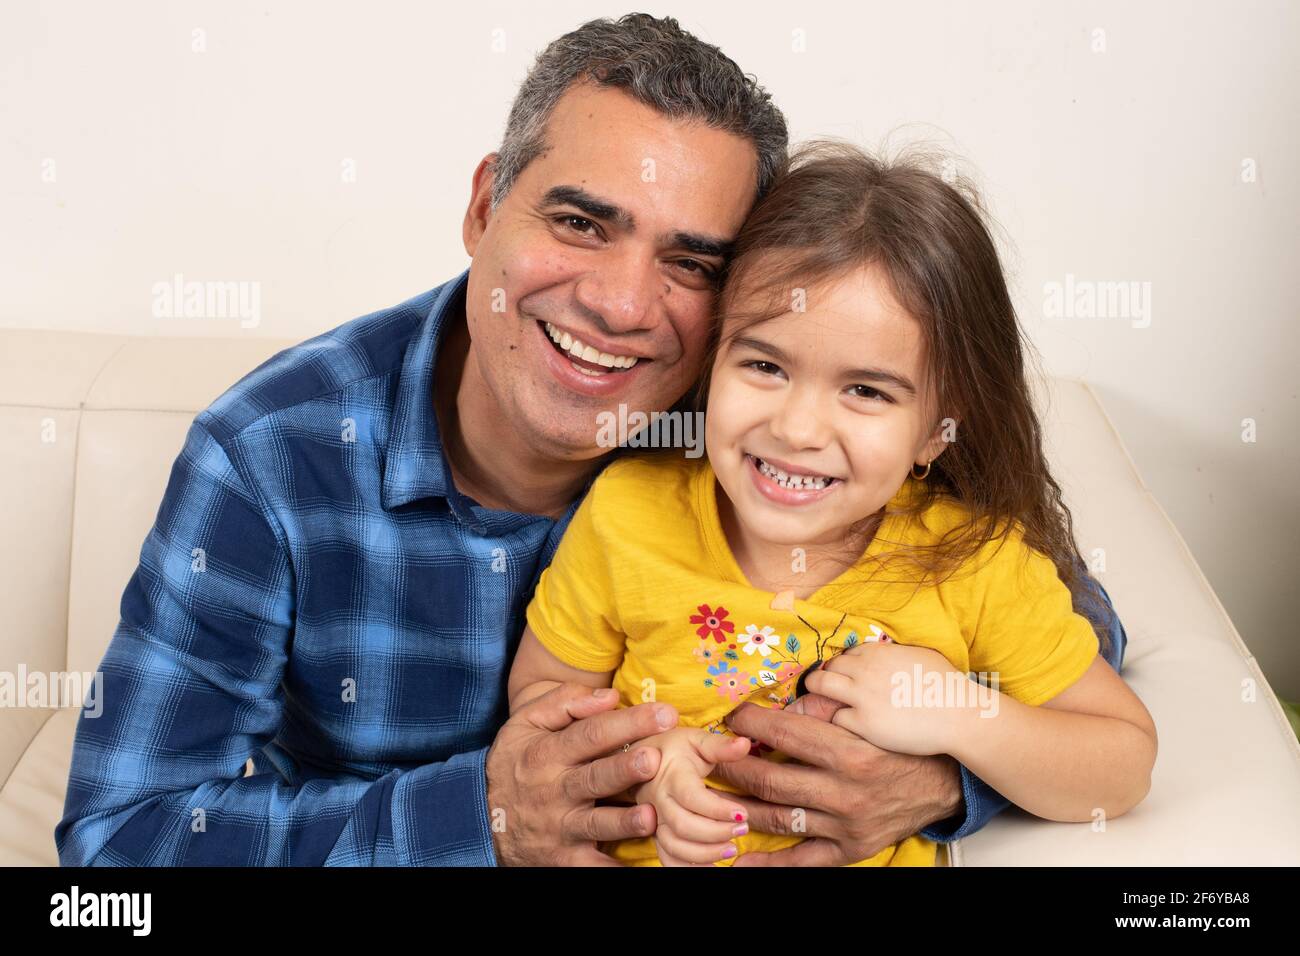 Portrait of four year old girl with her grandfather Stock Photo